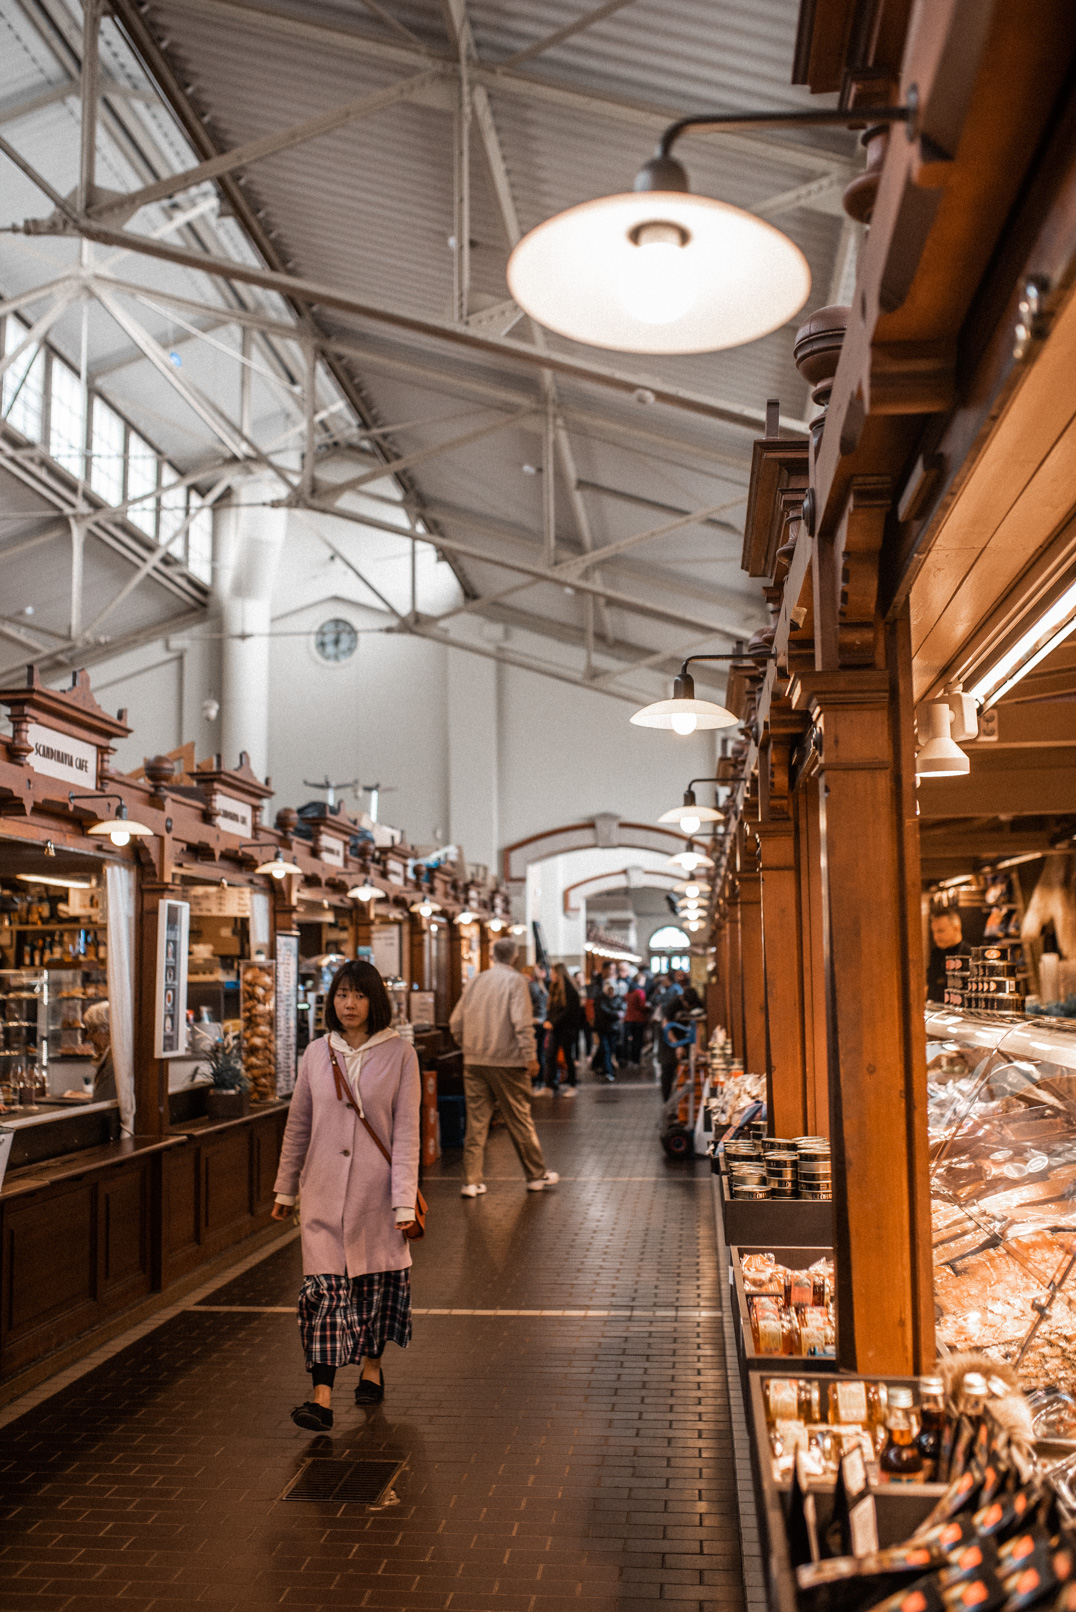 One day in Helsinki - The old Market hall serves reindeer pie and other delicacies 